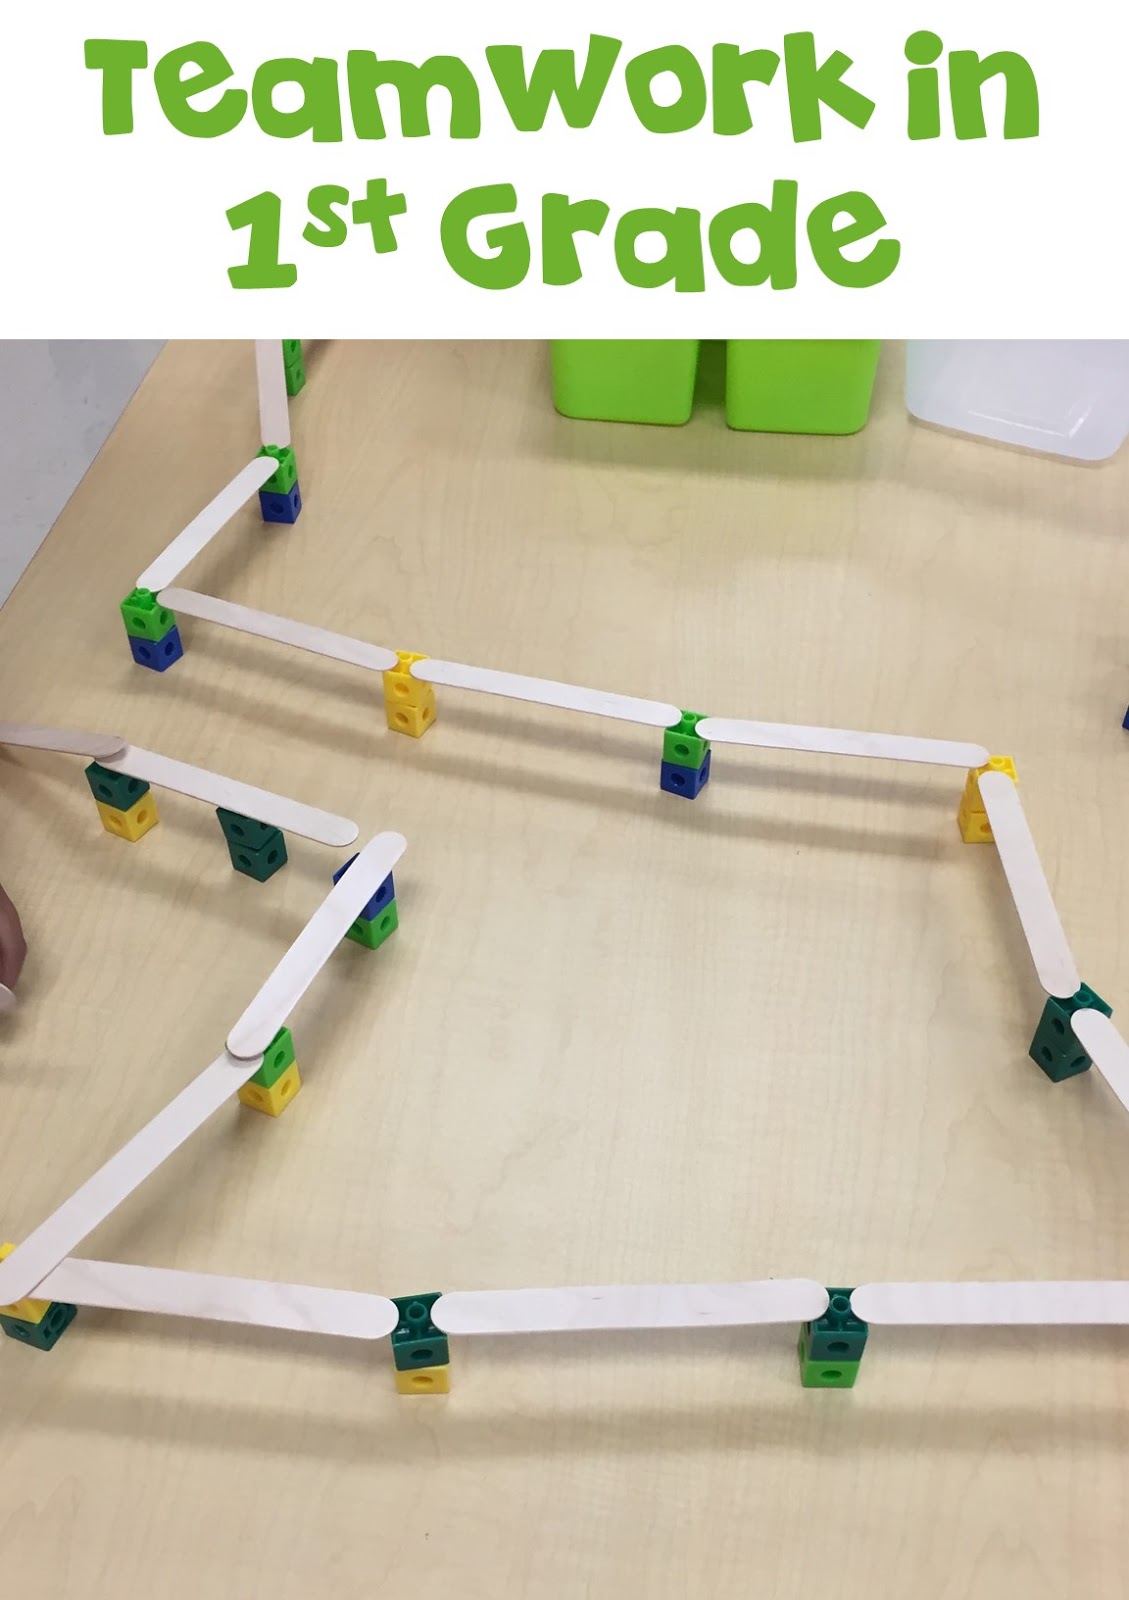 Ideas For Stem Projects For 1St Grade